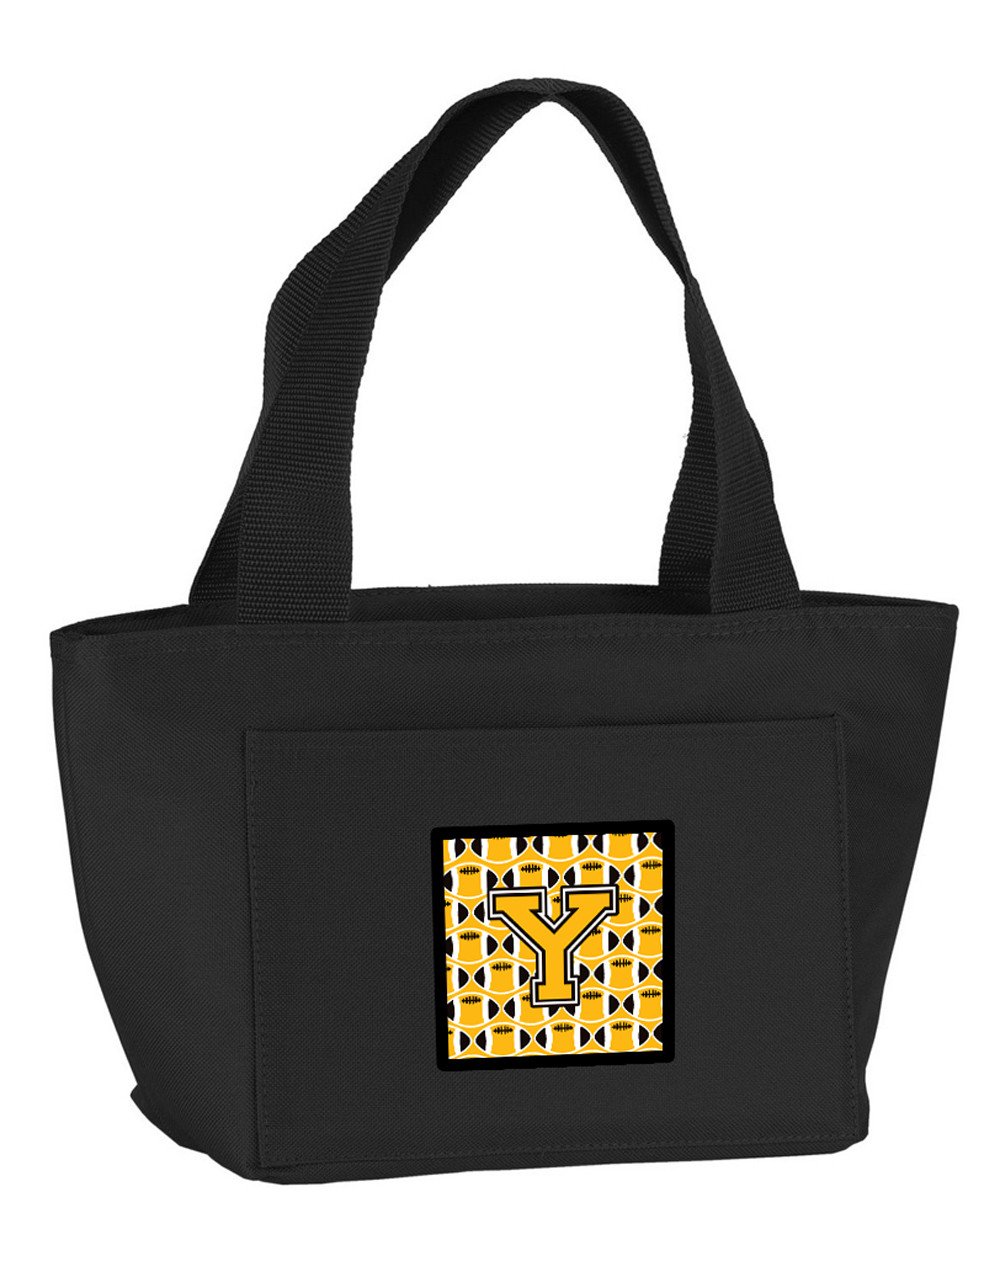 Letter Y Football Black, Old Gold and White Lunch Bag CJ1080-YBK-8808 by Caroline's Treasures